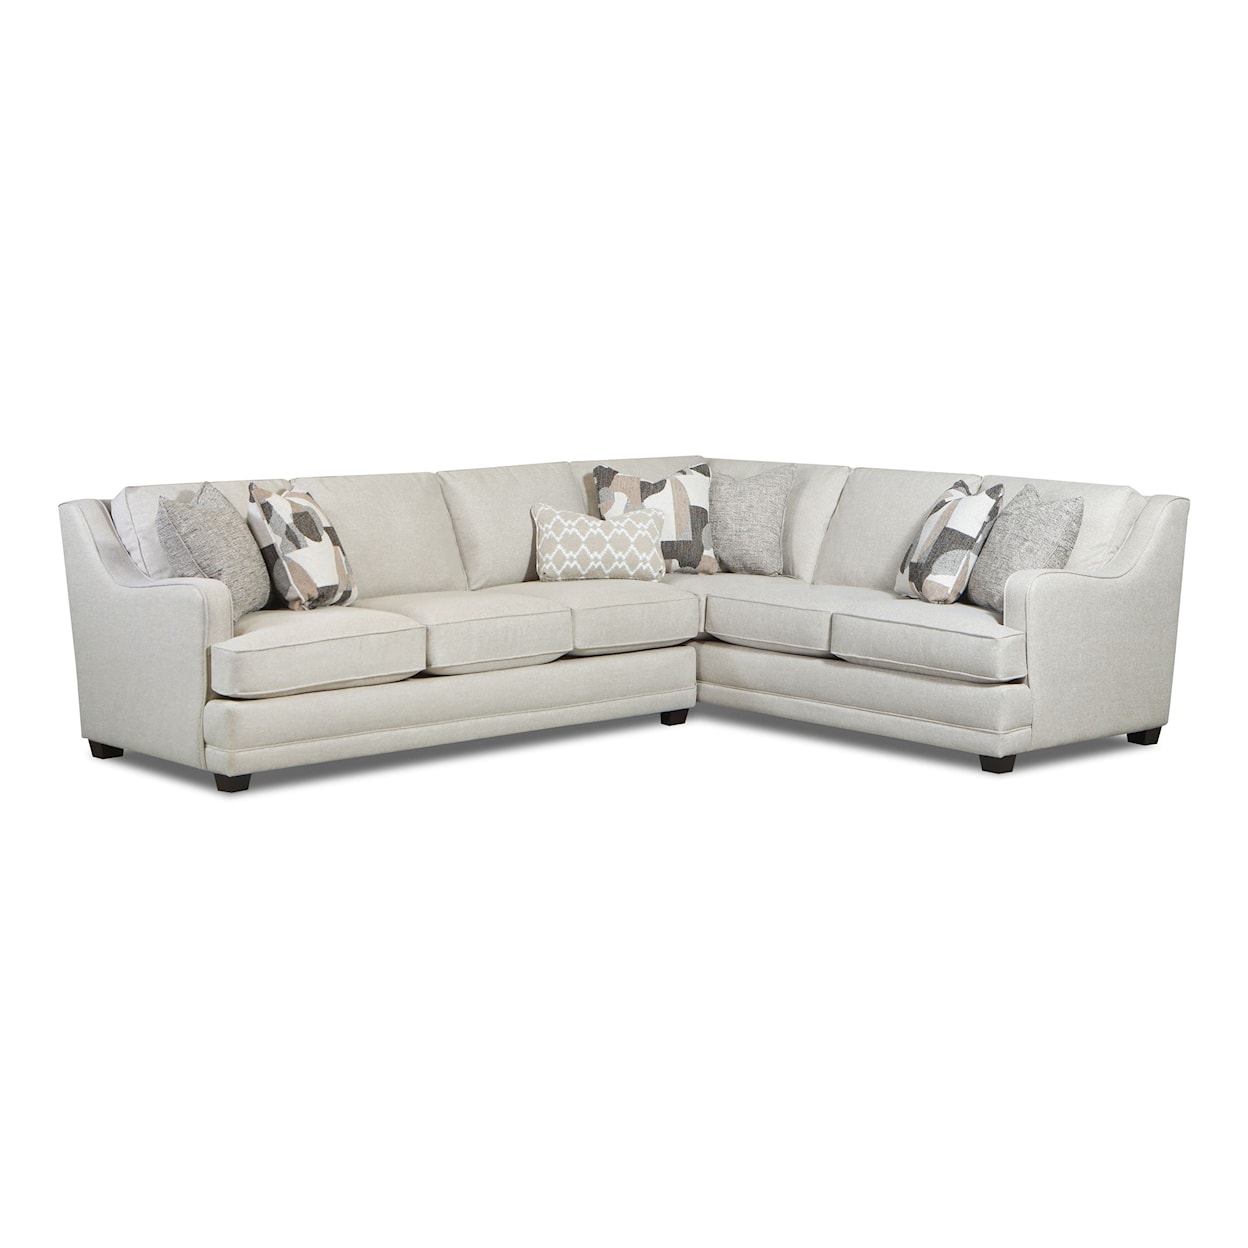 Fusion Furniture 7000 GOLD RUSH ANTIQUE 2-Piece Sectional